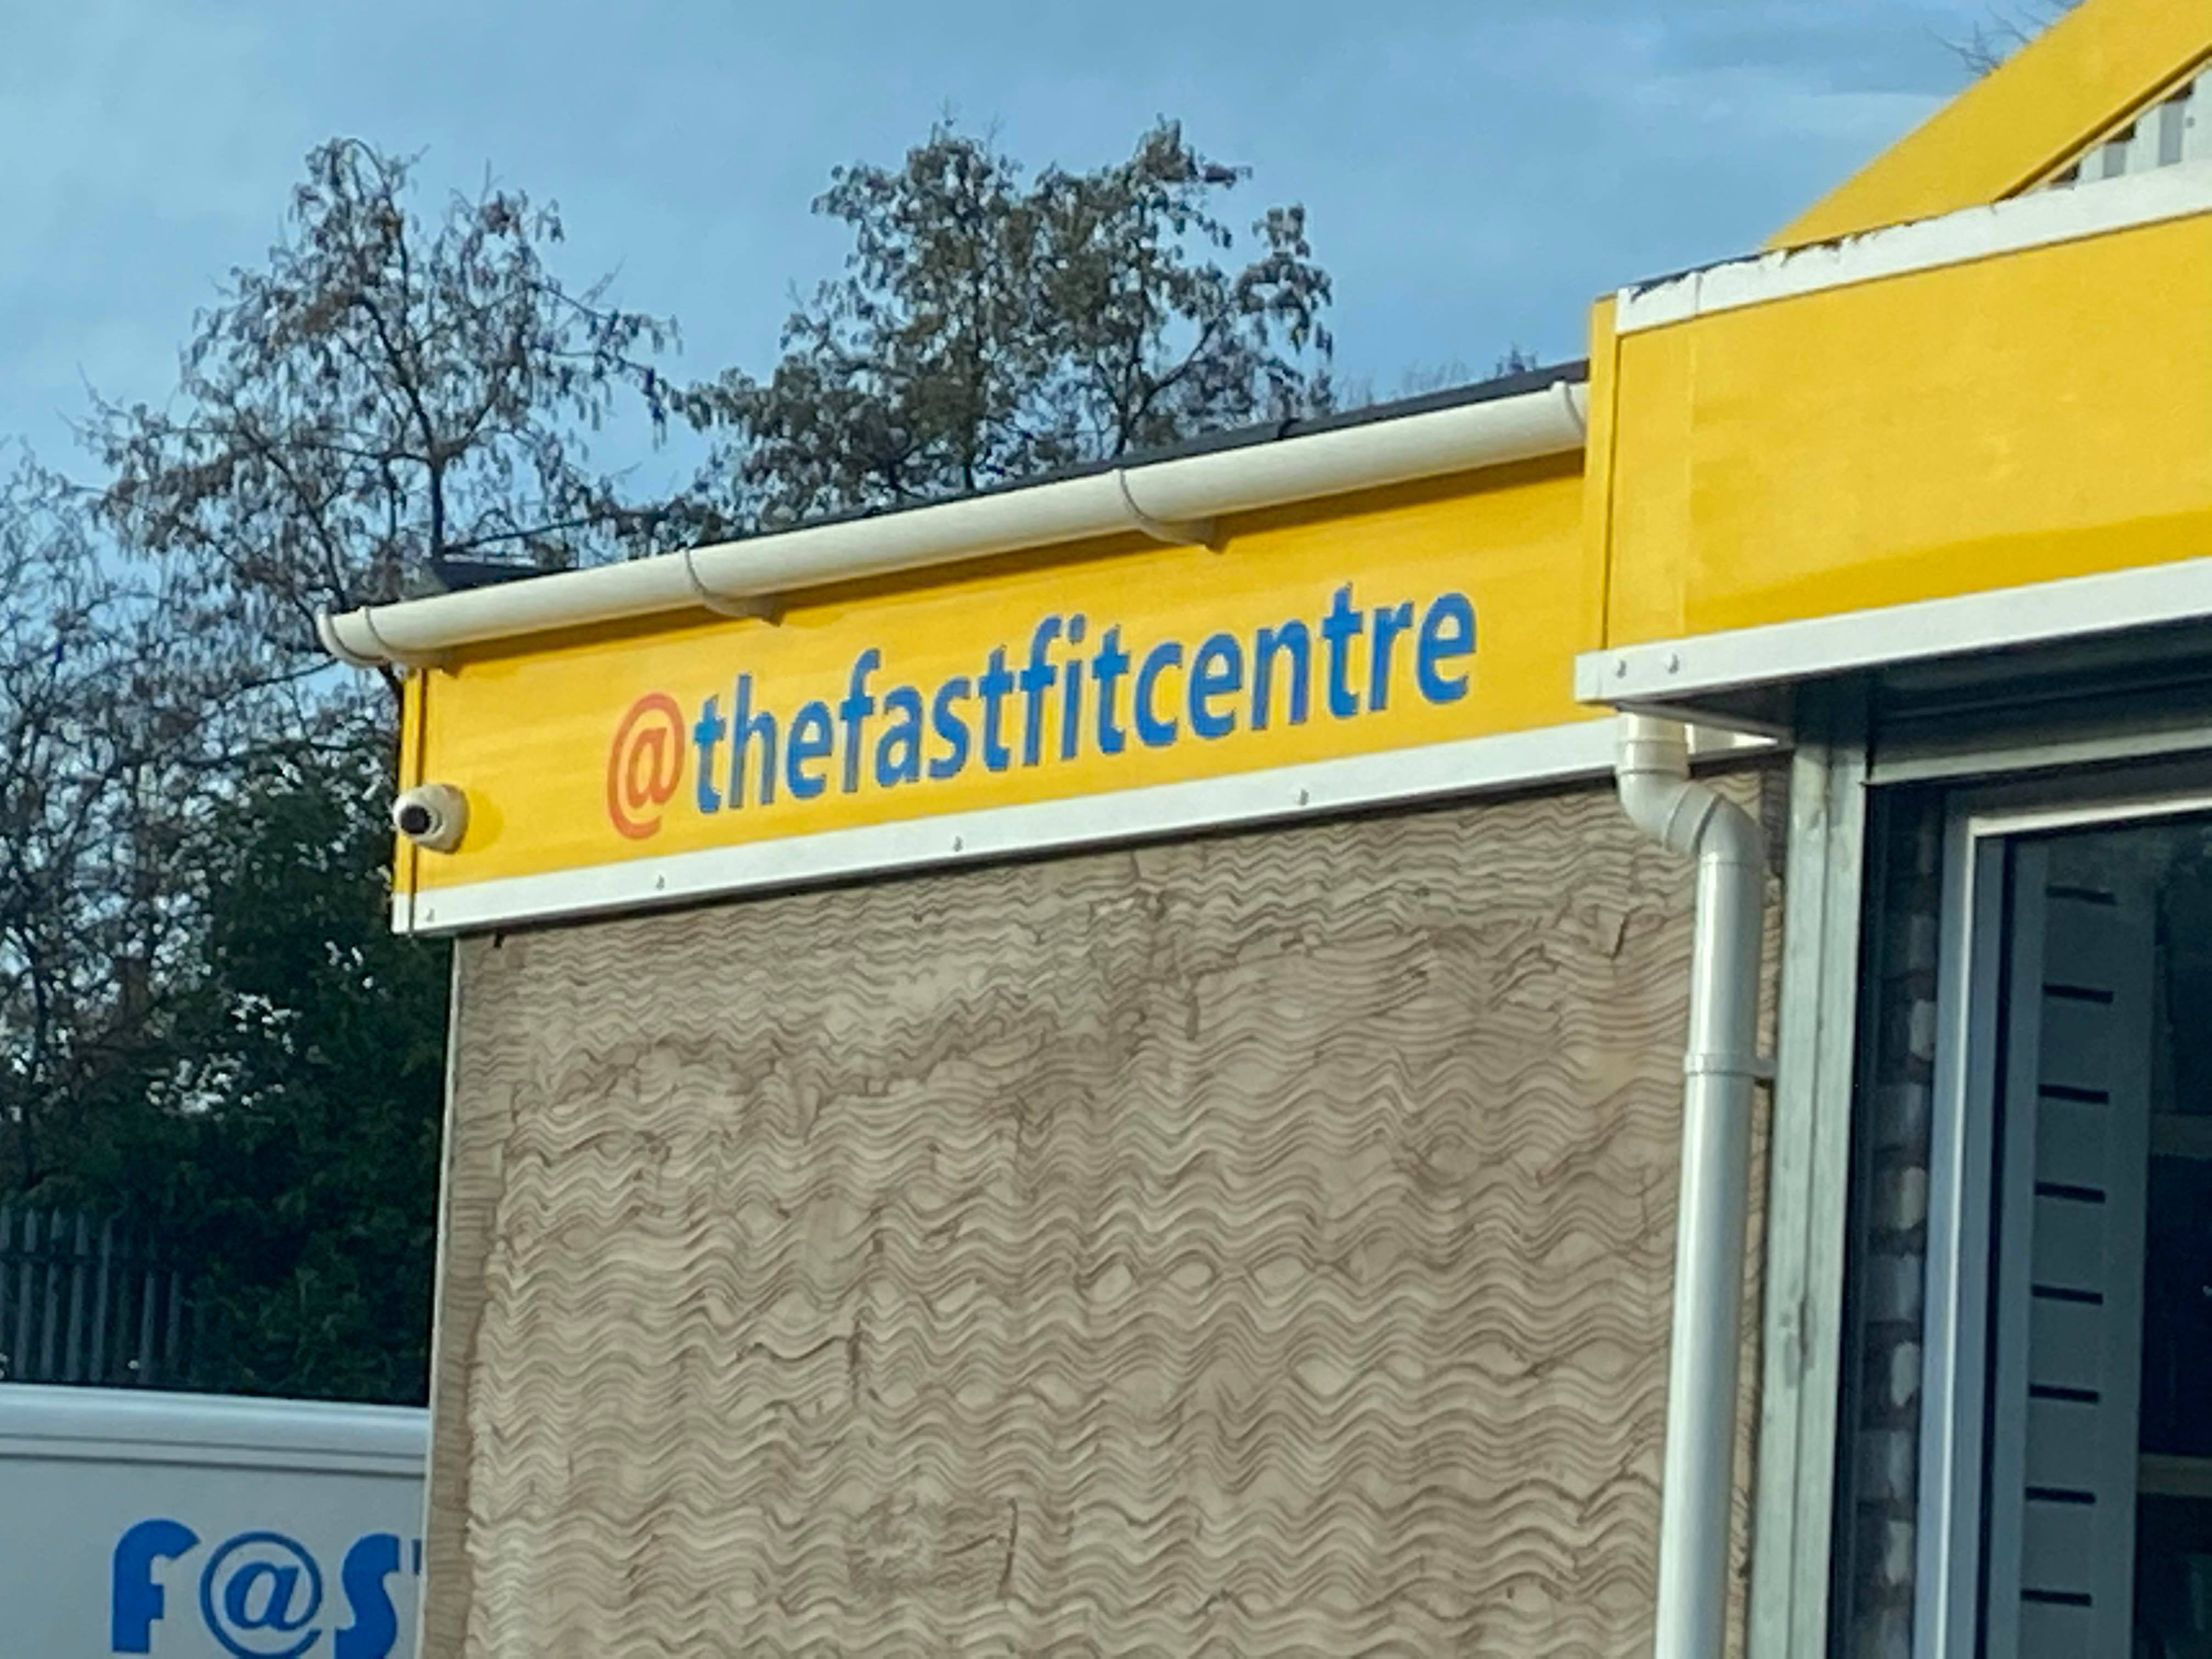 The Fastfit Centre